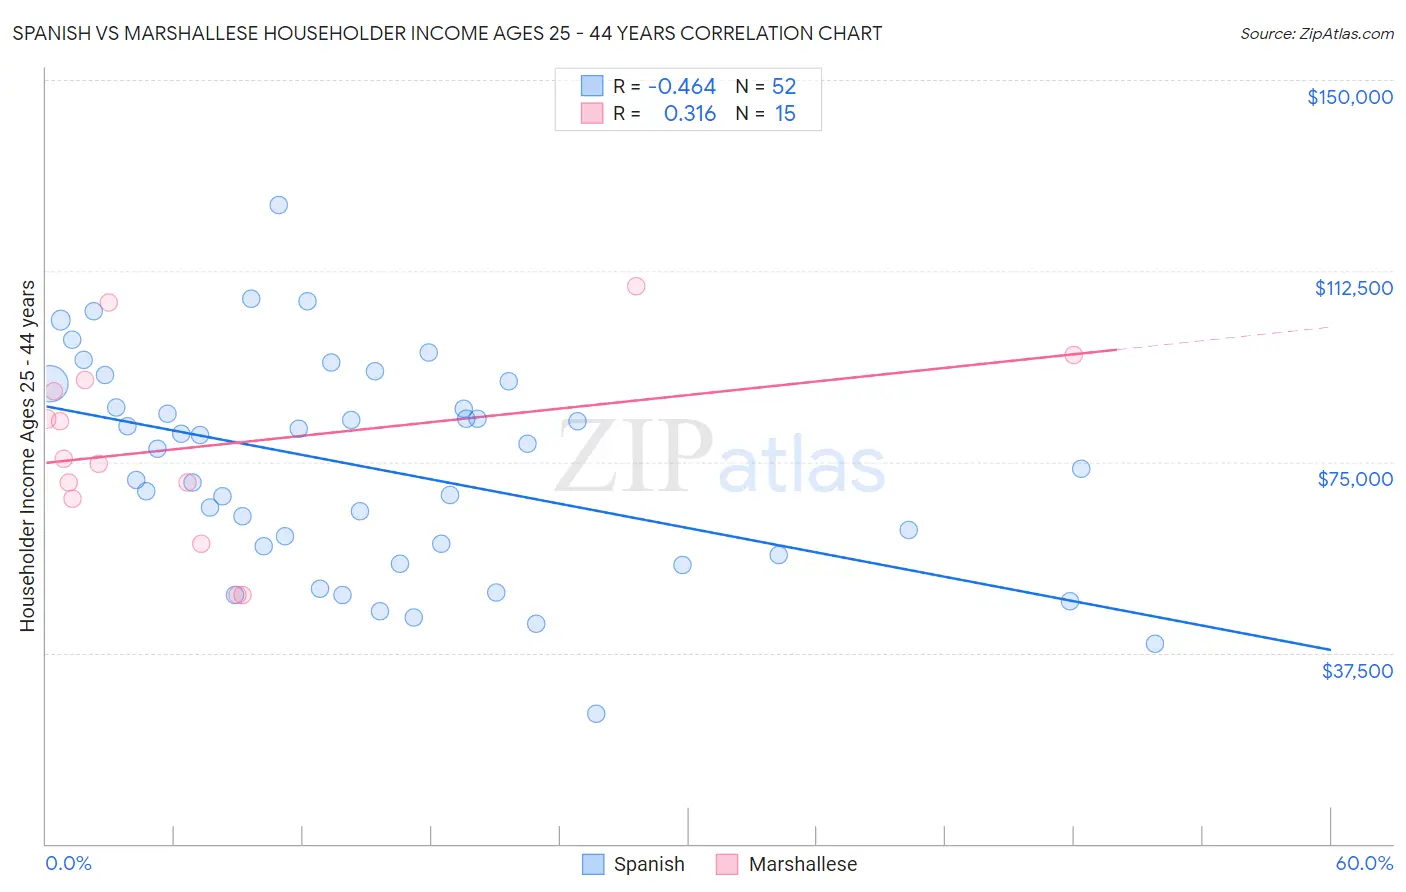 Spanish vs Marshallese Householder Income Ages 25 - 44 years